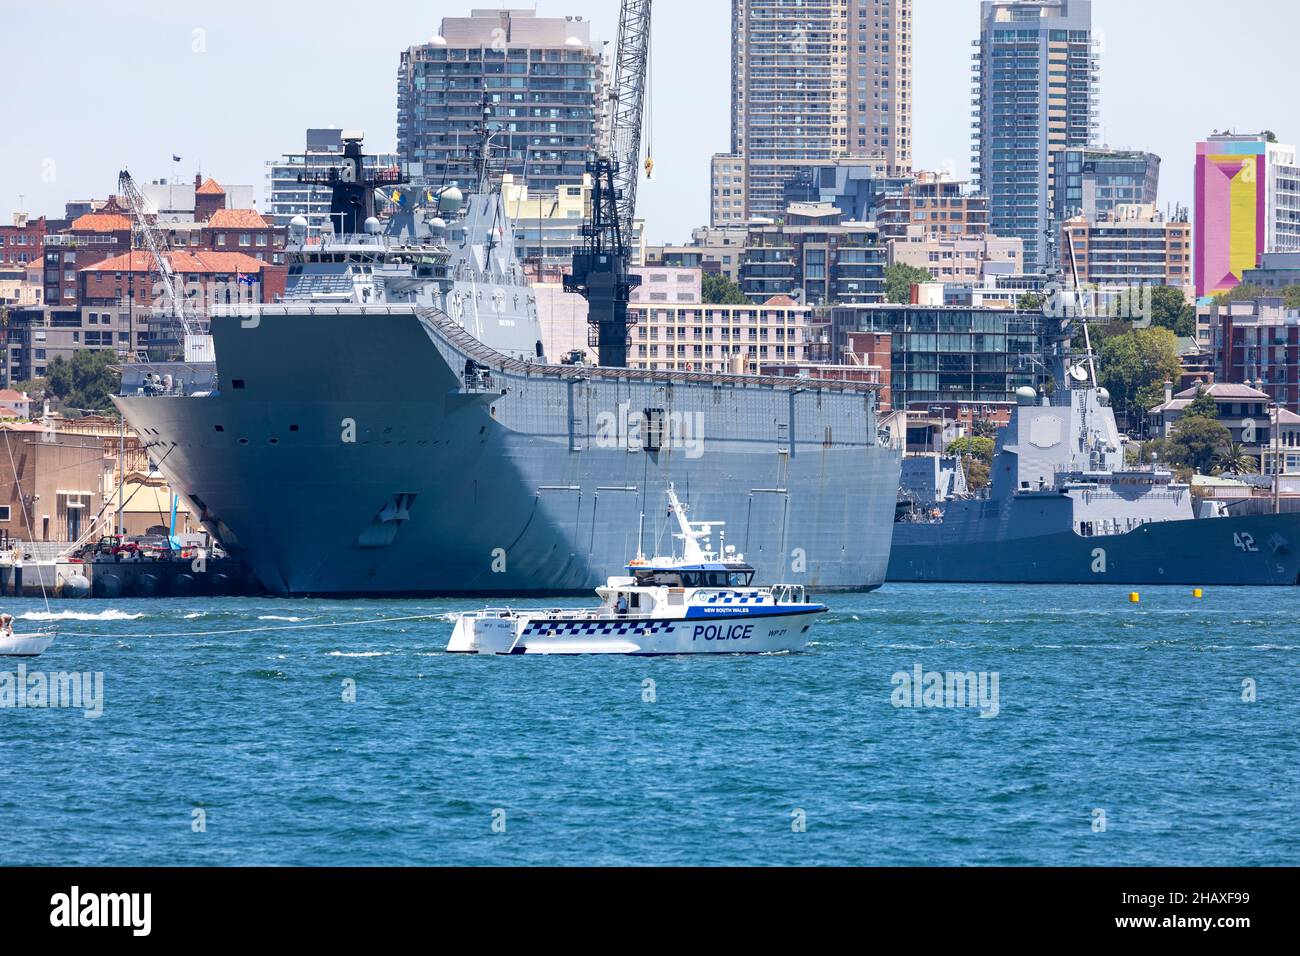 HMAS Canberra LO2 of the Royal Australian Navy at Garden Island naval base in Sydney, an amphibious assault ship launched in 2011. Police boat nearby Stock Photo